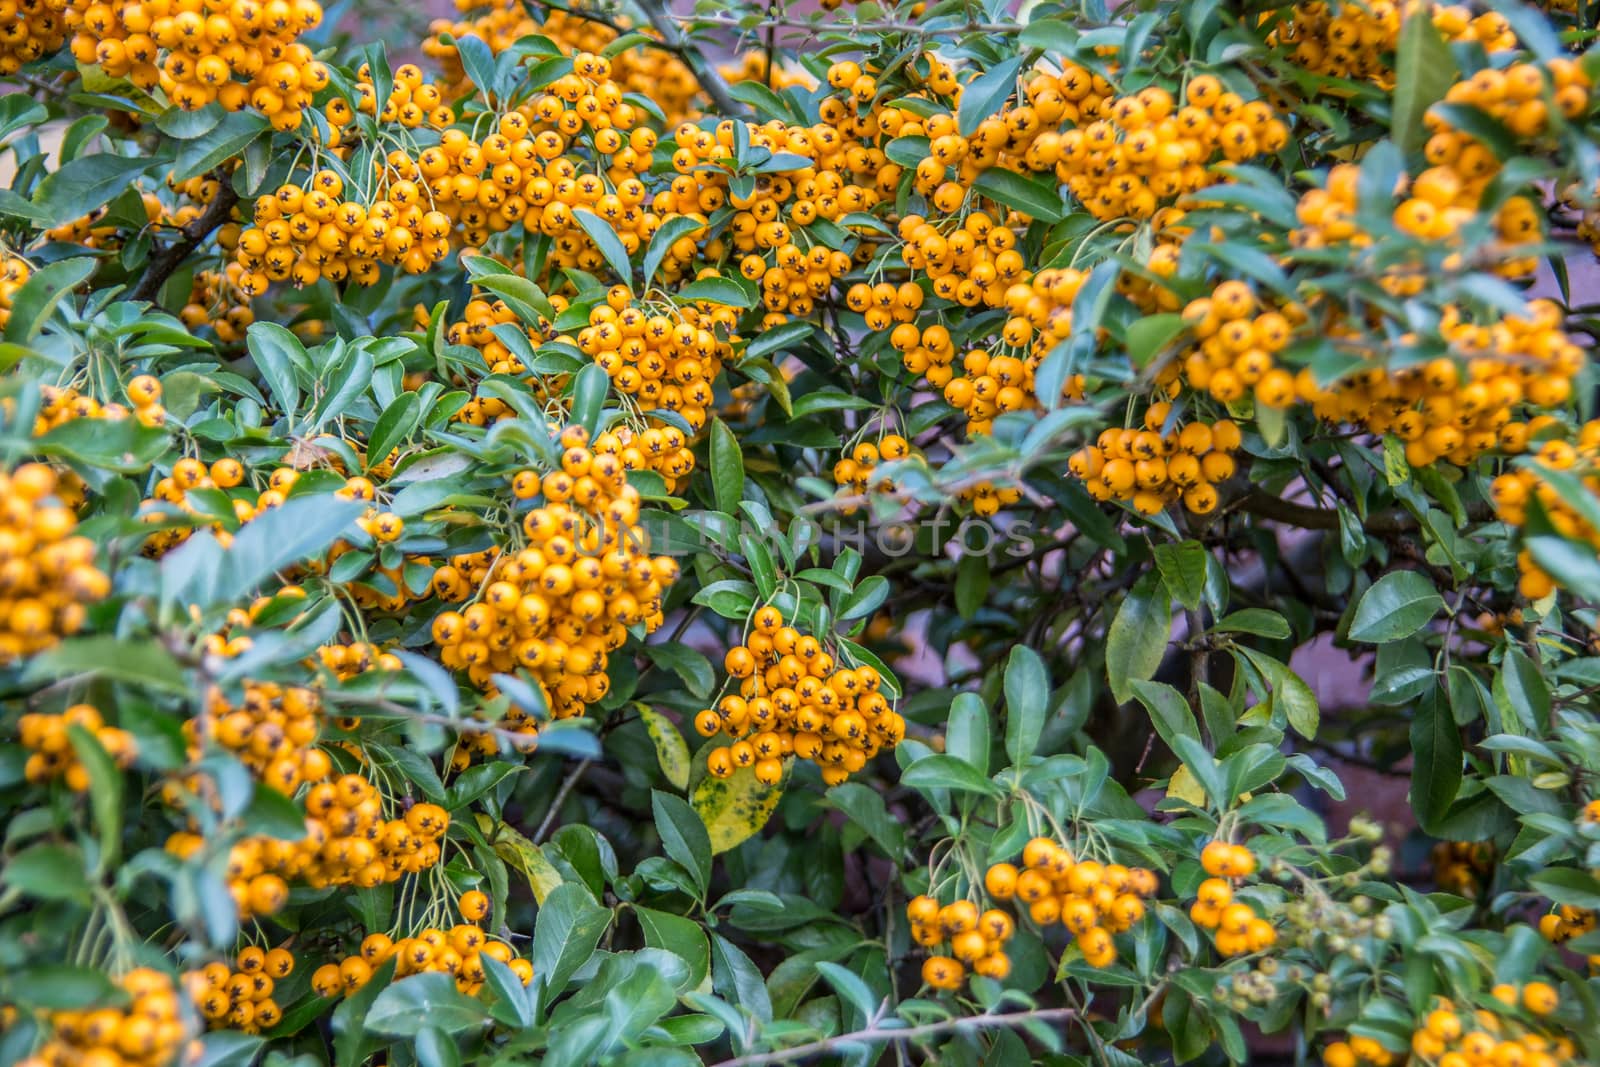 evergreen shrub with yellow berries by Dr-Lange